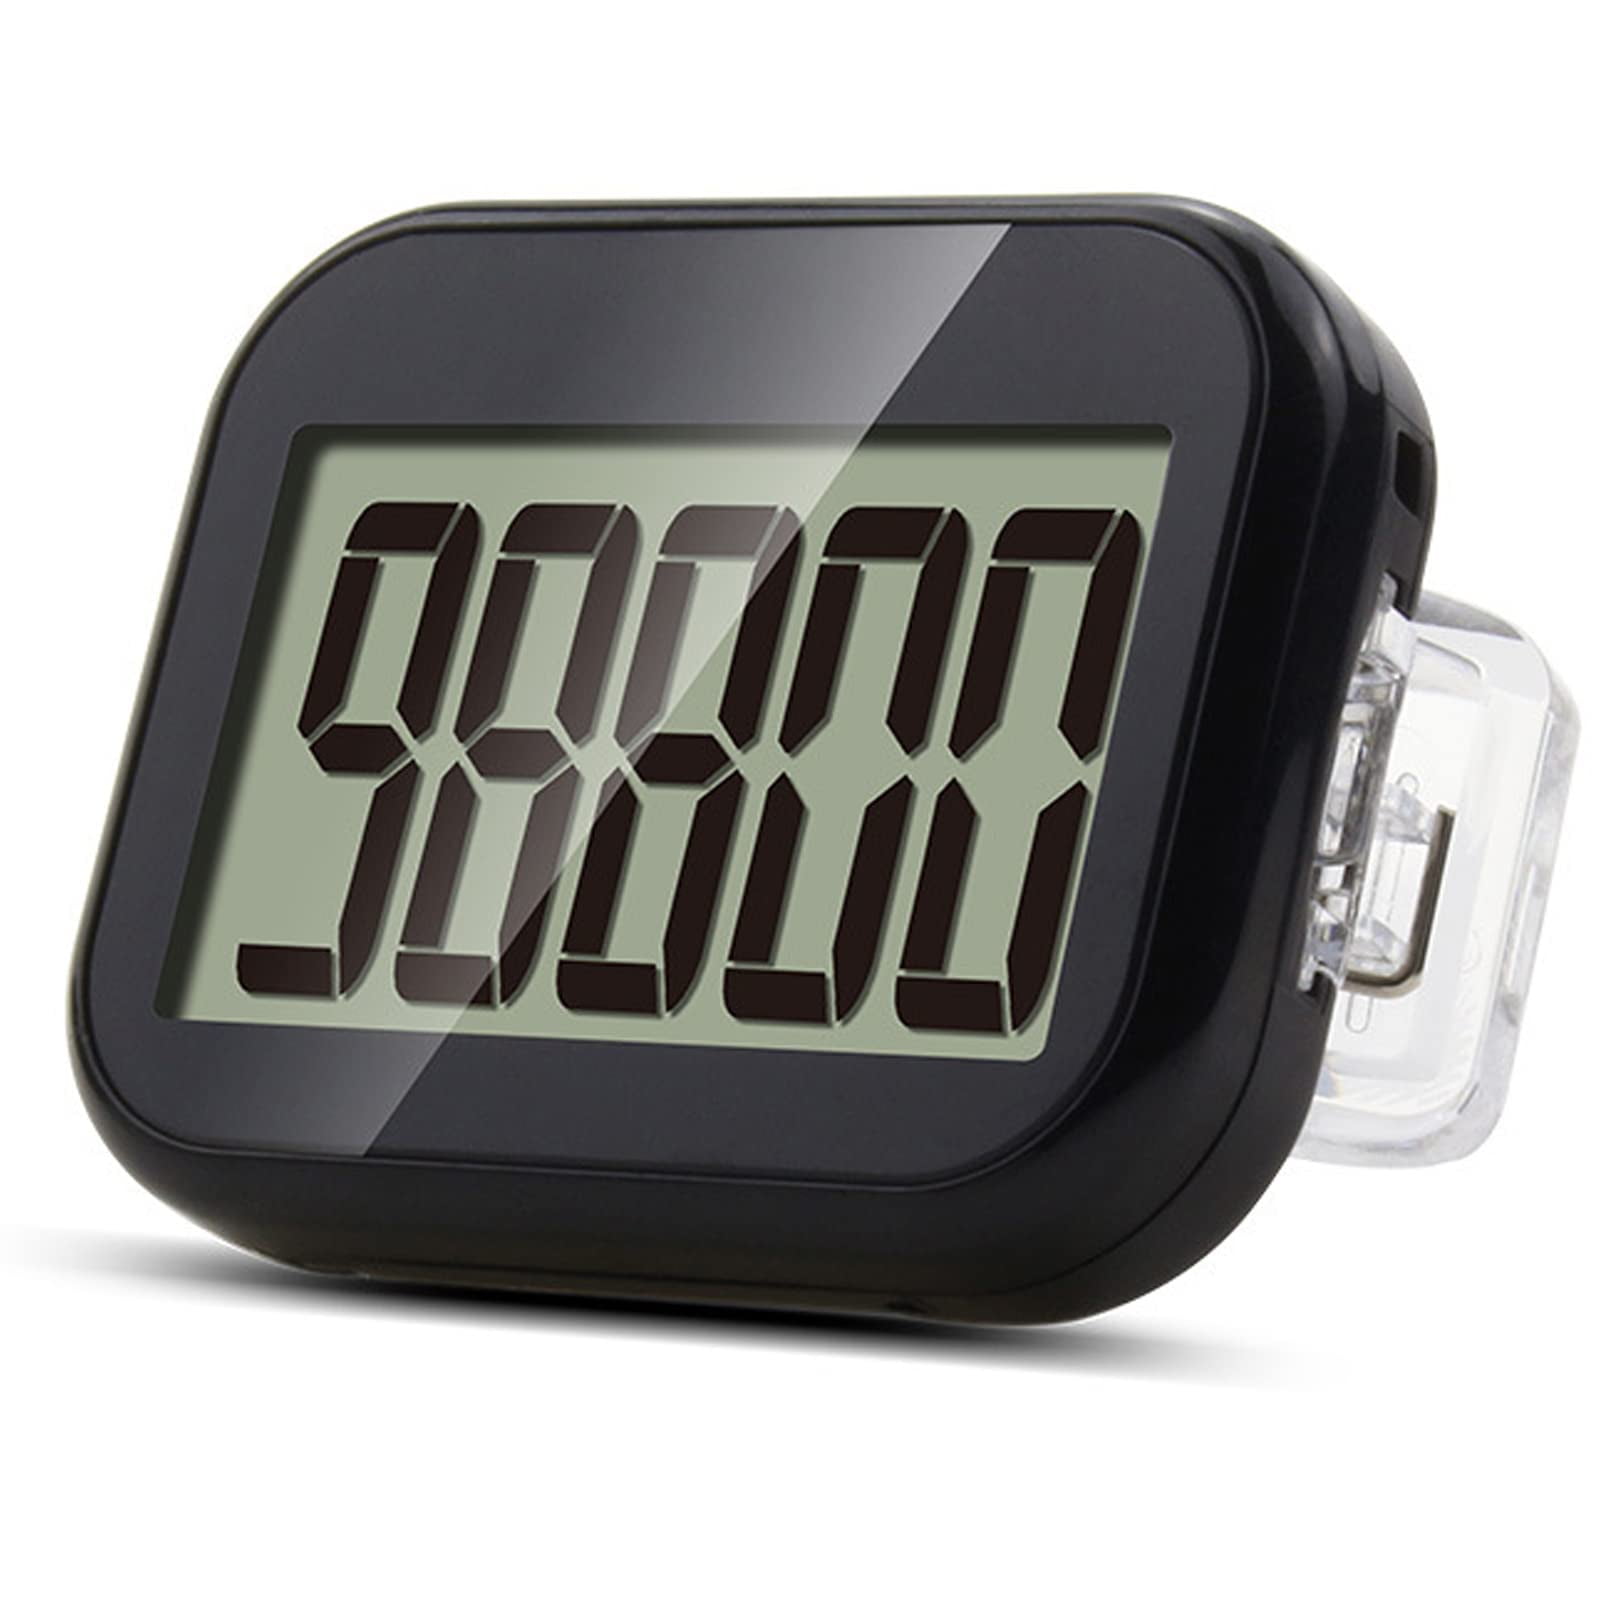 Multi-Function Portab PINGKO Best Pedometer for Walking Accurately Track Steps 